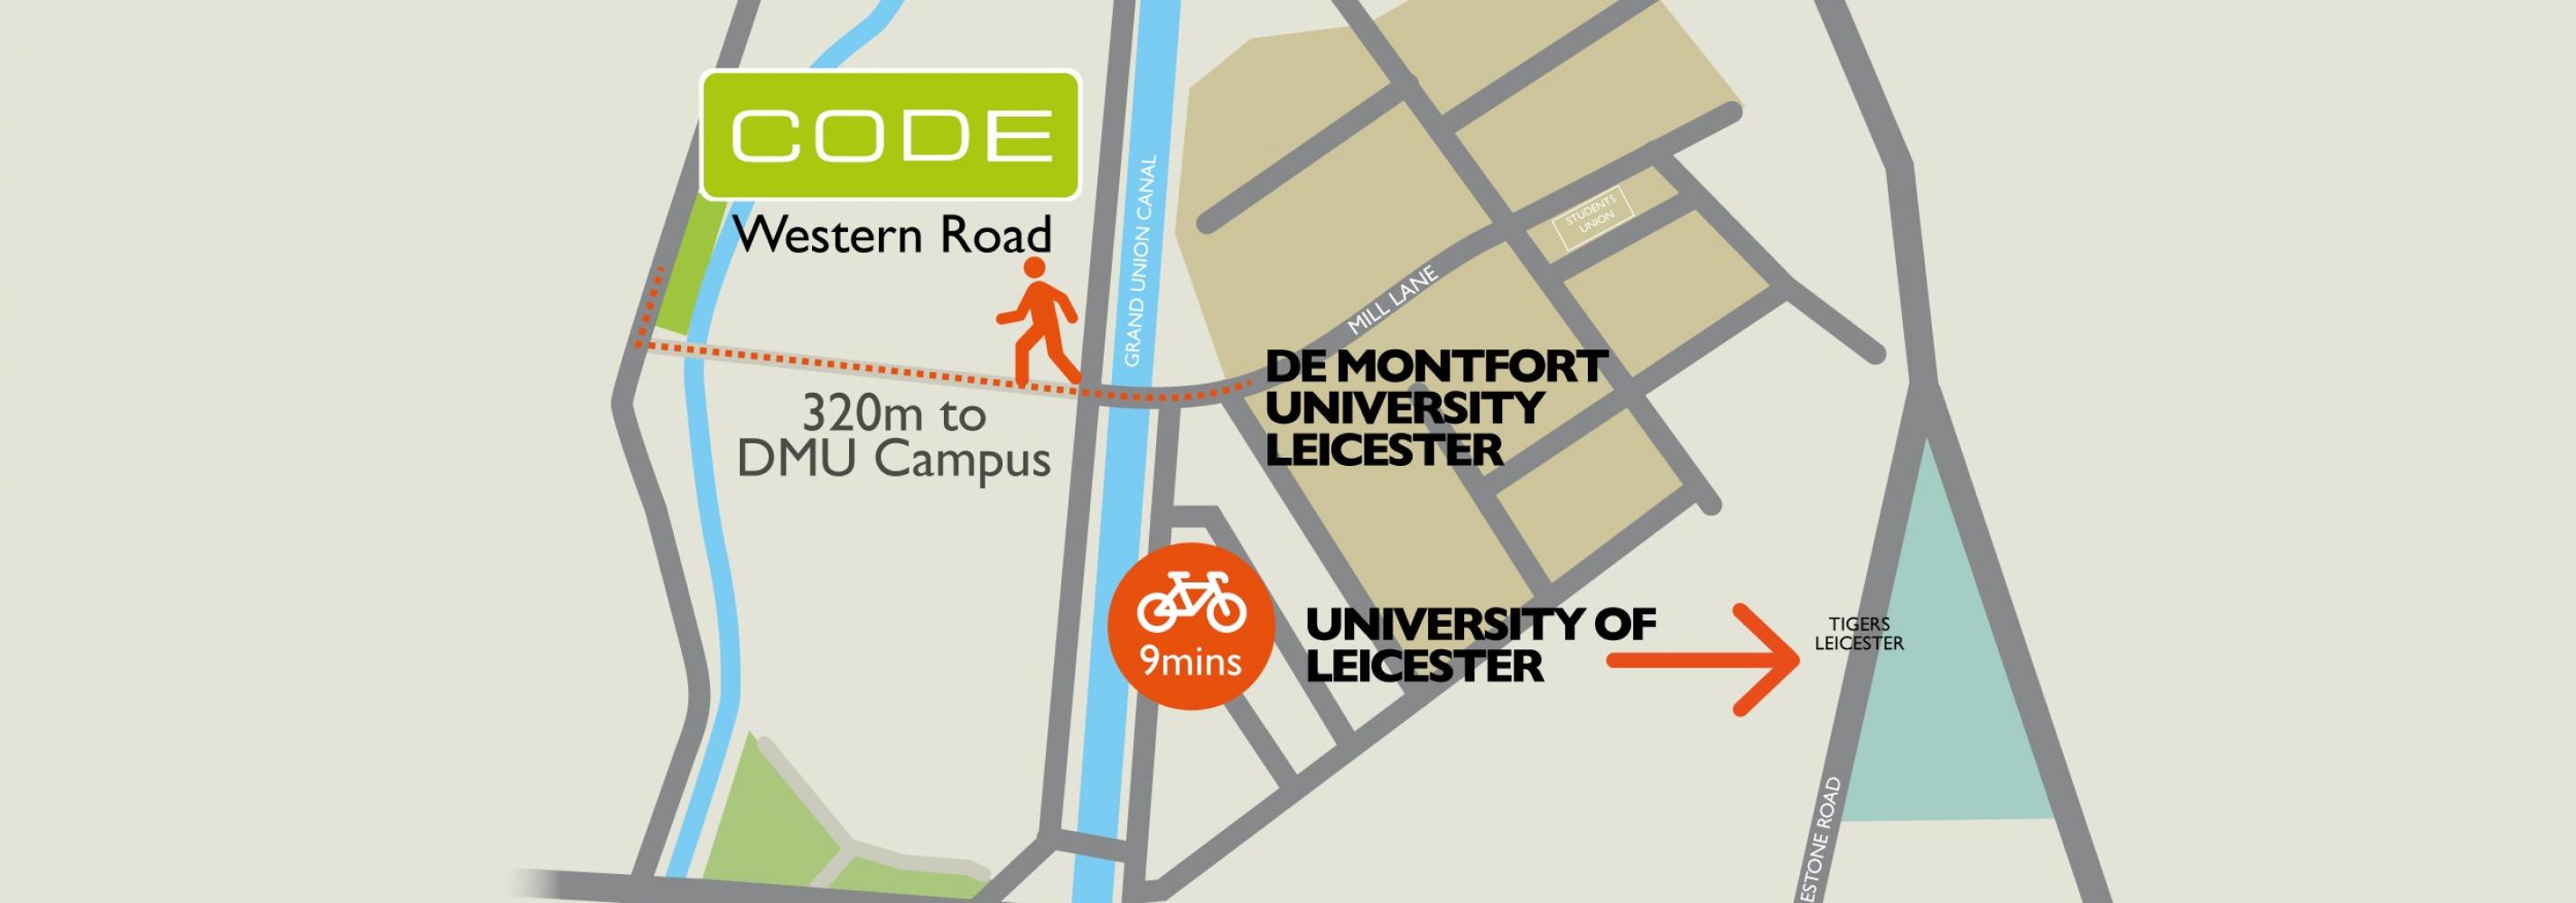 We're only 9minutes bicycle ride from the University of Leicester